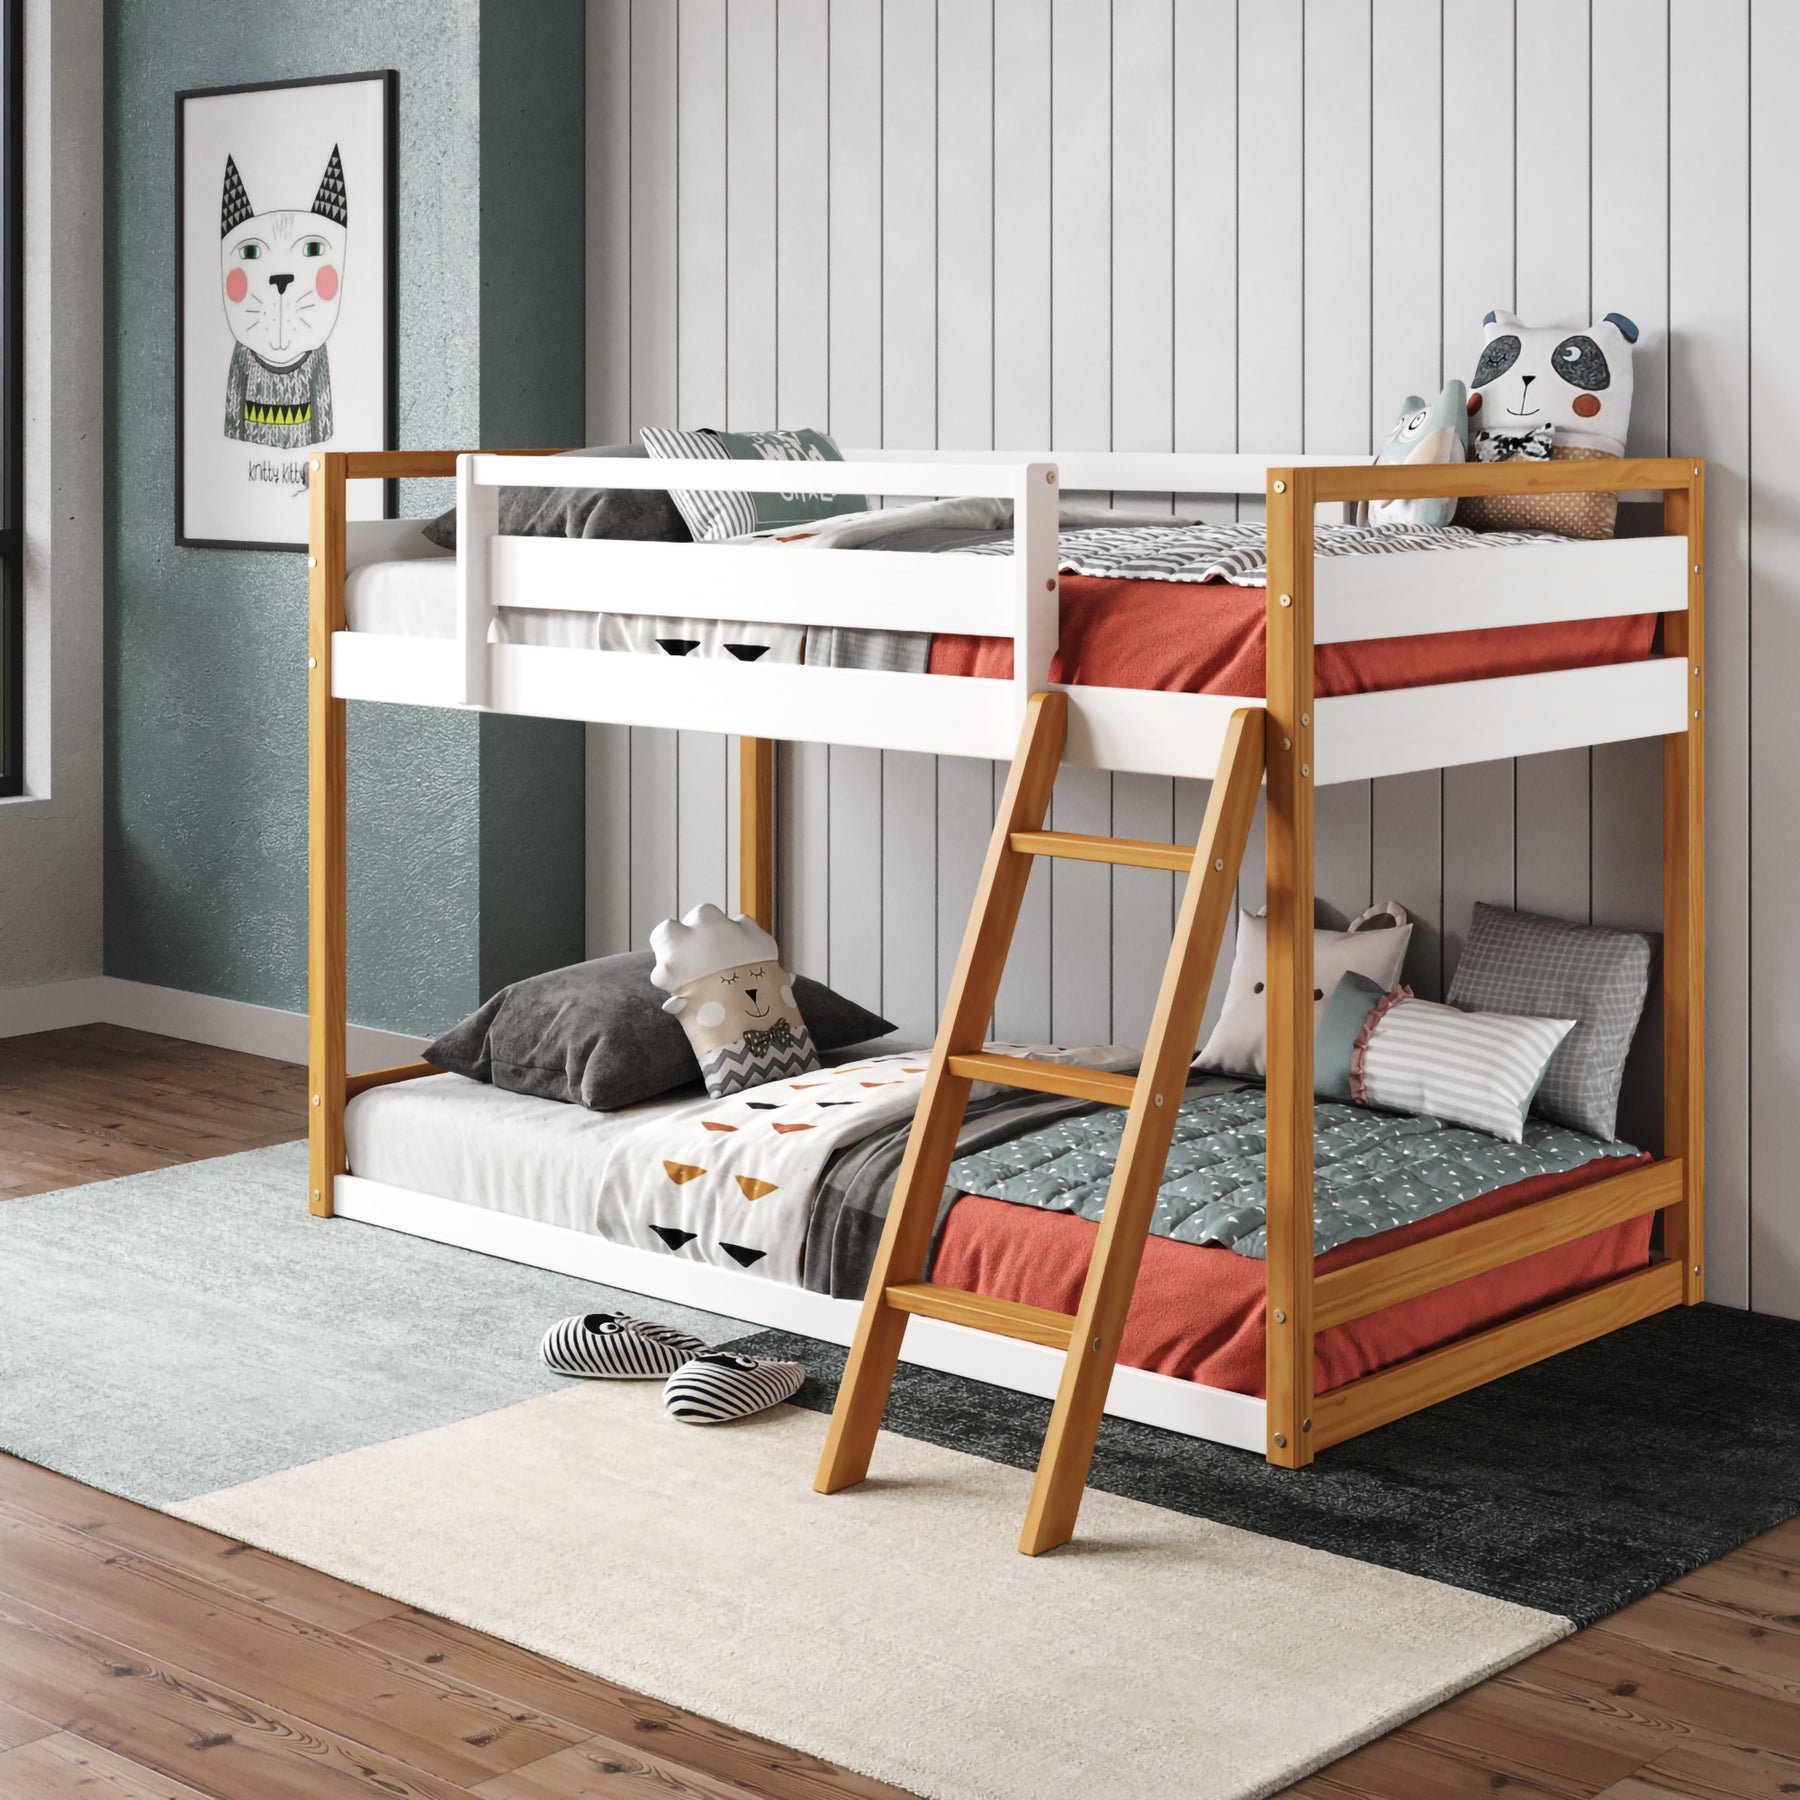 P'kolino Quadra Bunk Bed - White and Natural - Chic and Affordable: Transform Your Space with a Two-Tone All Wood Bunk Bed Introducing our Quadra Solid Wood Twin Bunk Bed for Kids – a perfect combination of functionality, durability, and contemporary style. Crafted with care from natural pine wood, this bunk bed showcases the beauty of solid wood and is designed to stand the test of time.